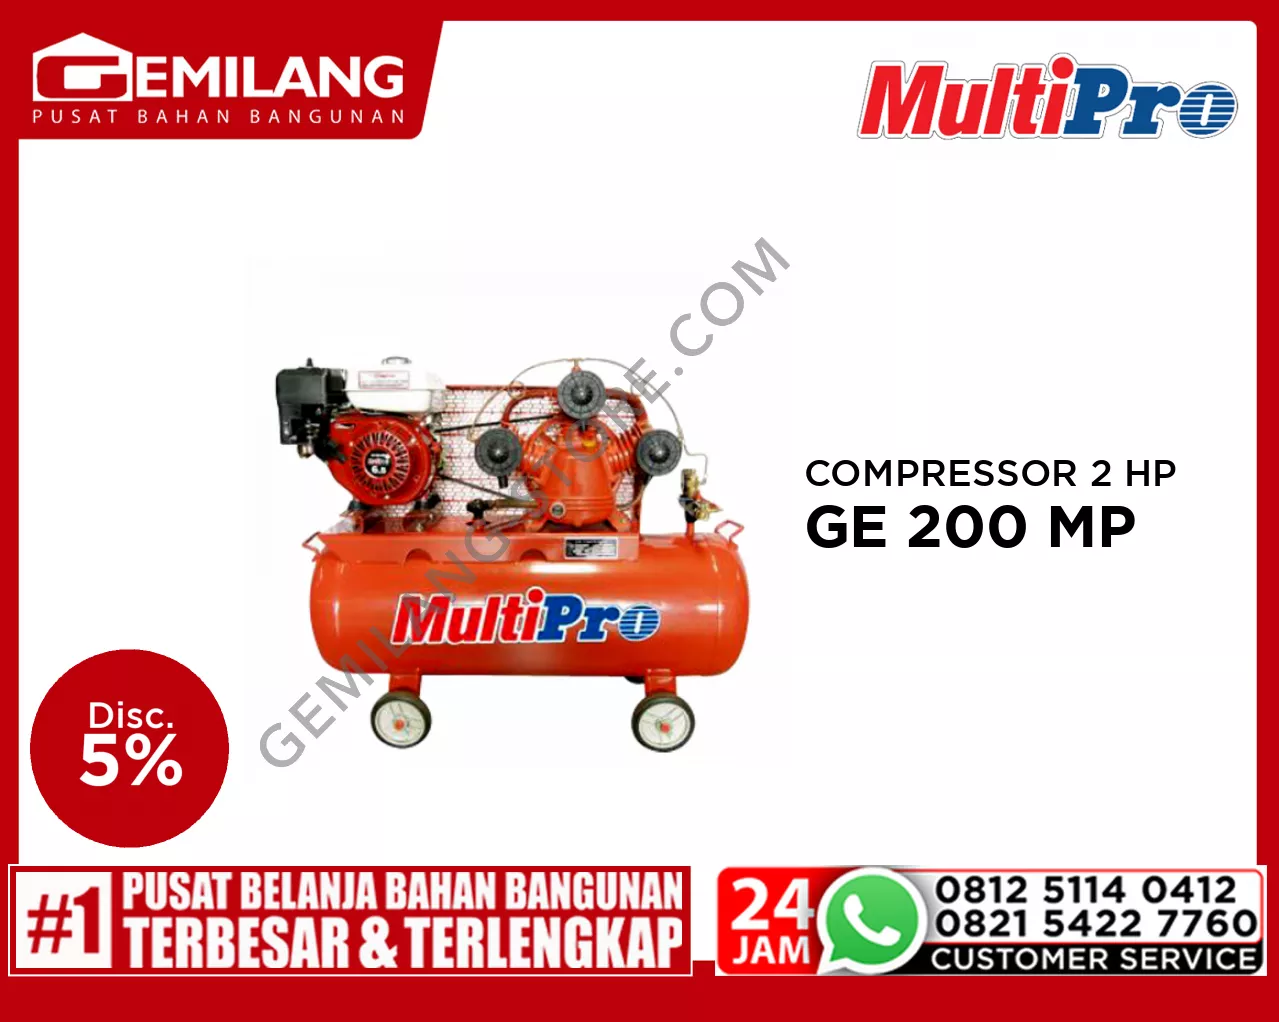 MULTIPRO COMPRESSOR 2 HP WITH ENGINE GE 200 MP(6.5)